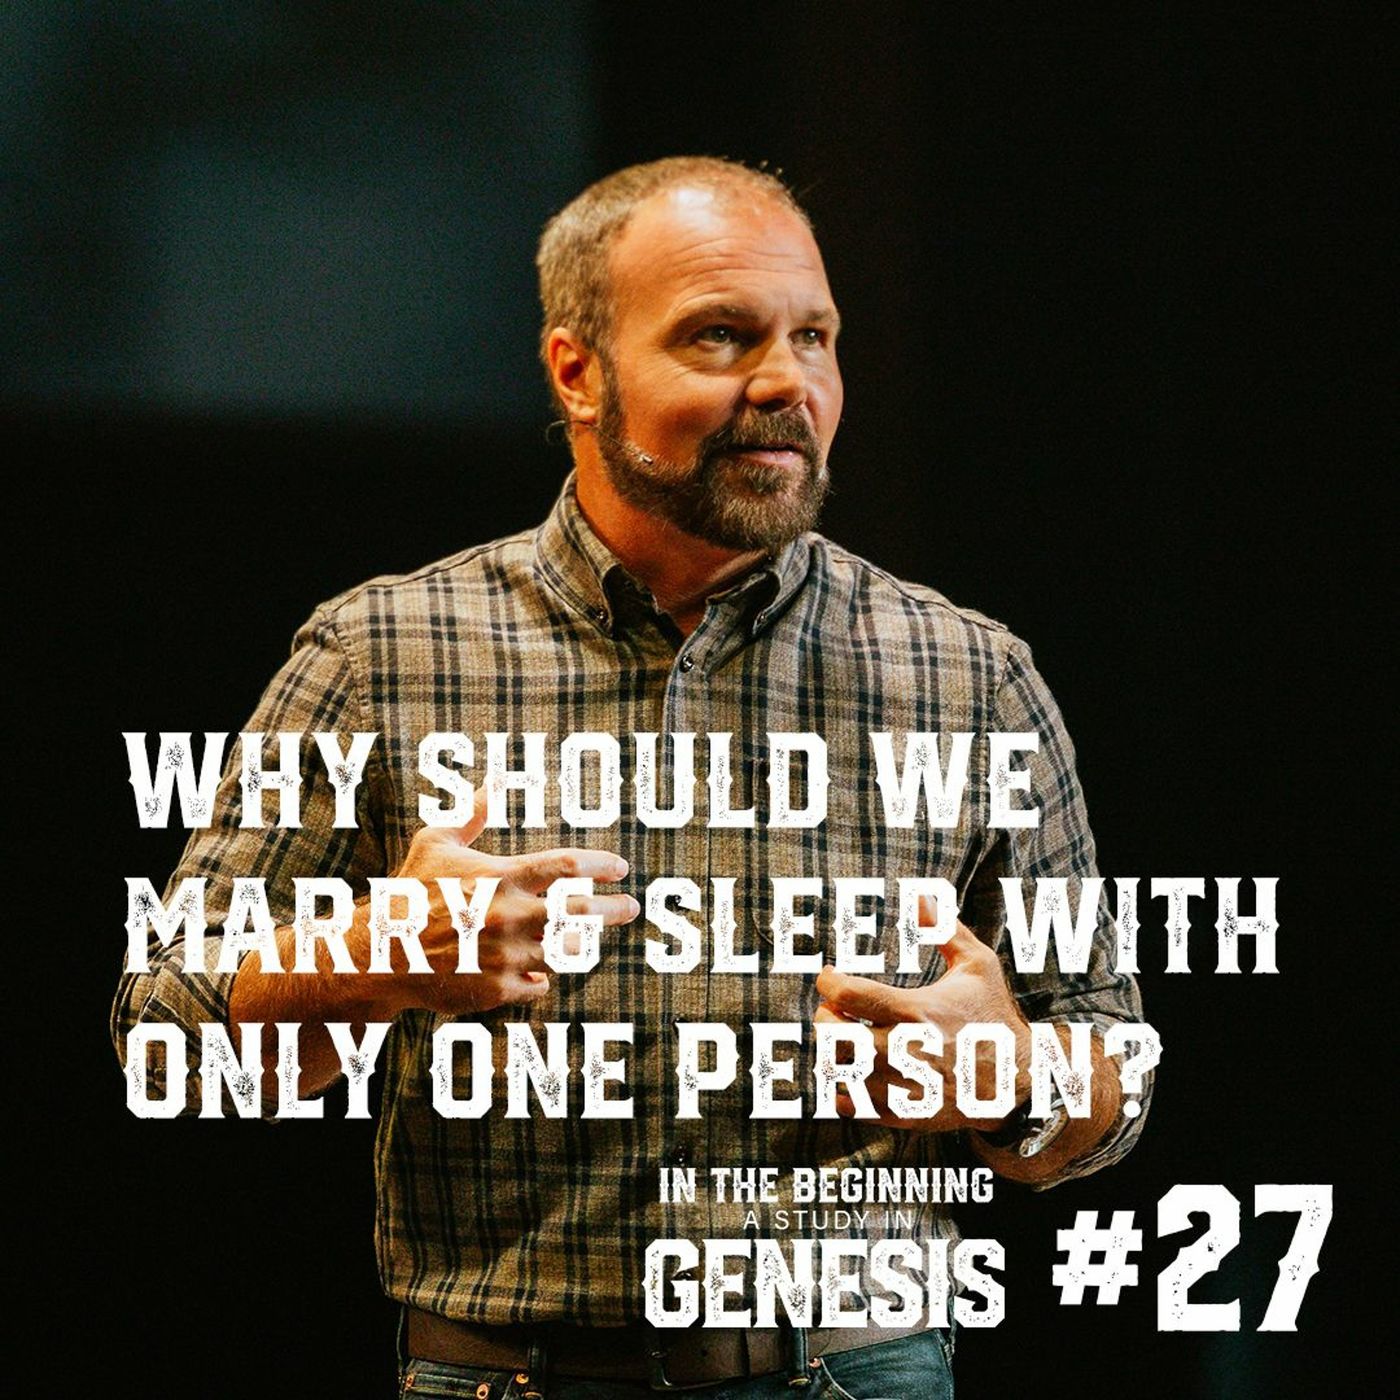 Genesis #27 - Why Should We Marry & Sleep with Only One Person?